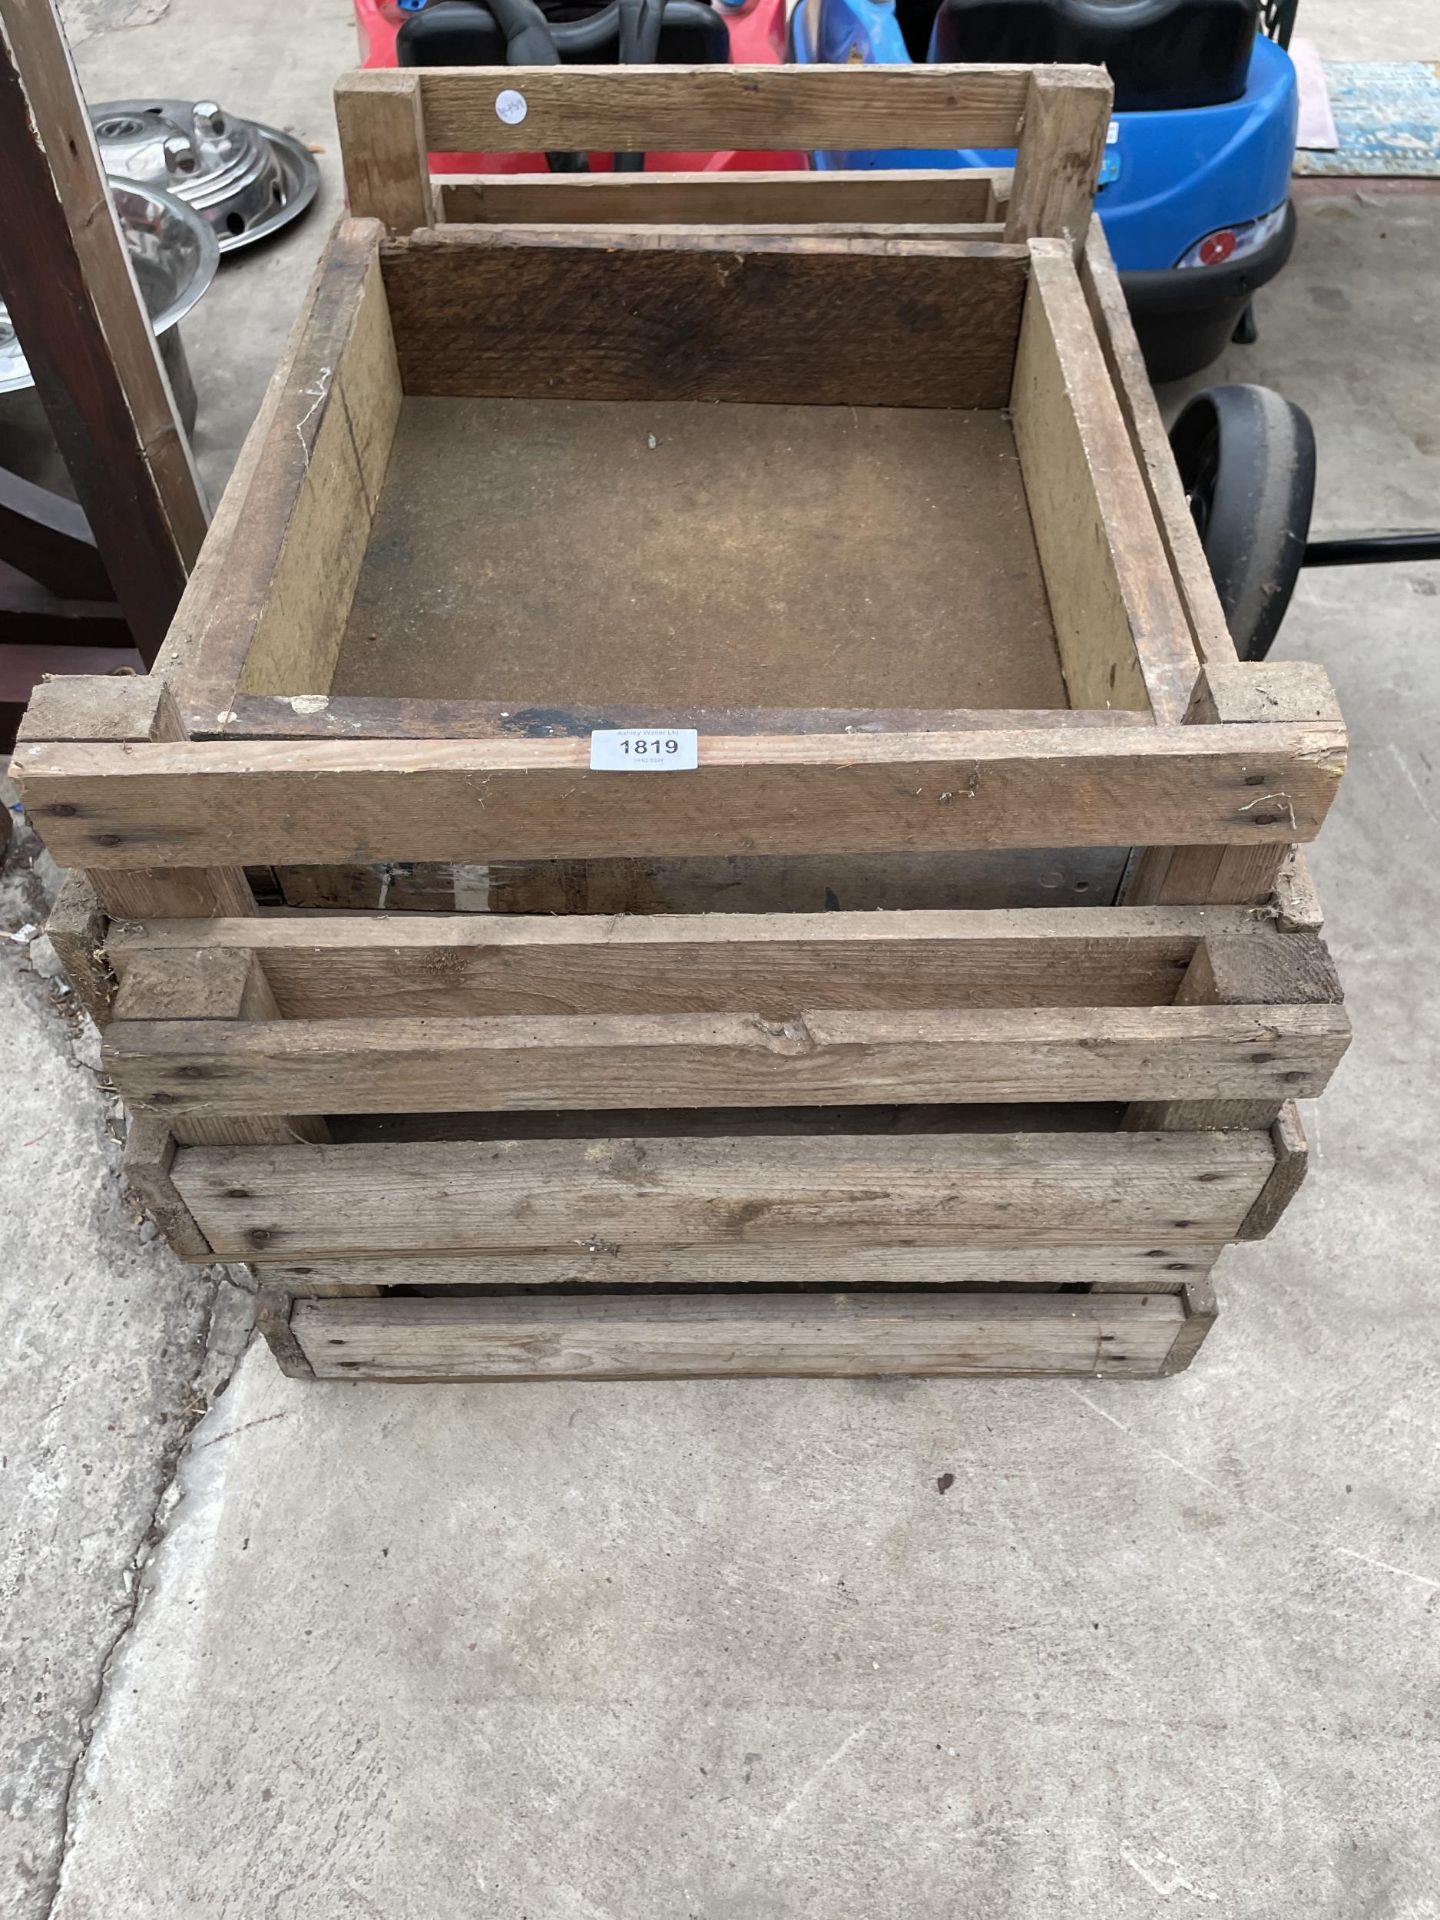 THREE VINTAGE WOODEN SPRITTING TRAYS AND A WOODEN BOX - Image 2 of 2